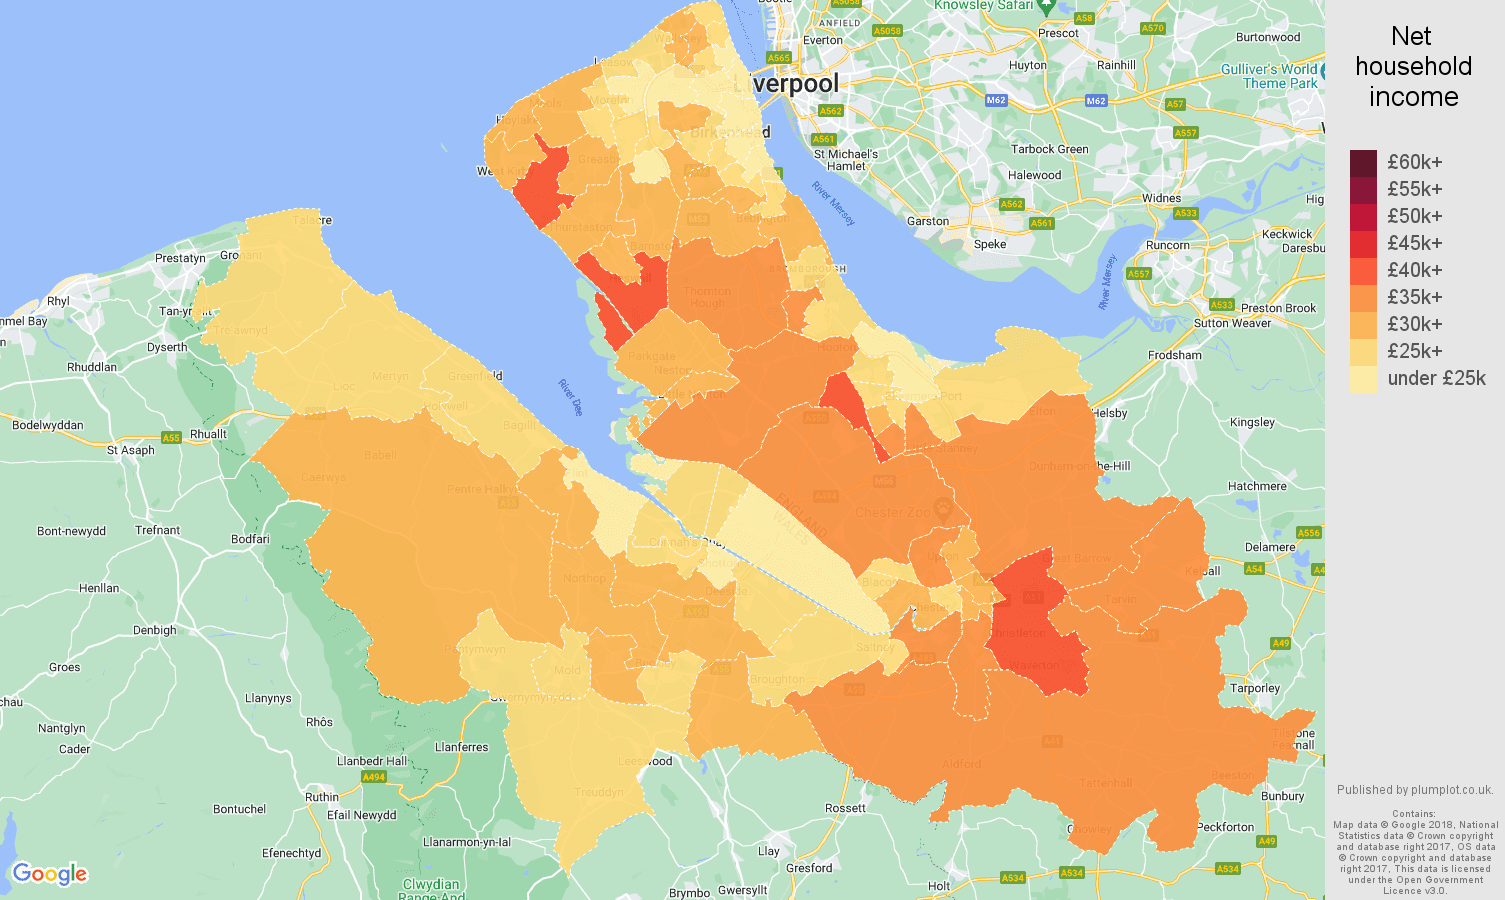 Chester net household income map